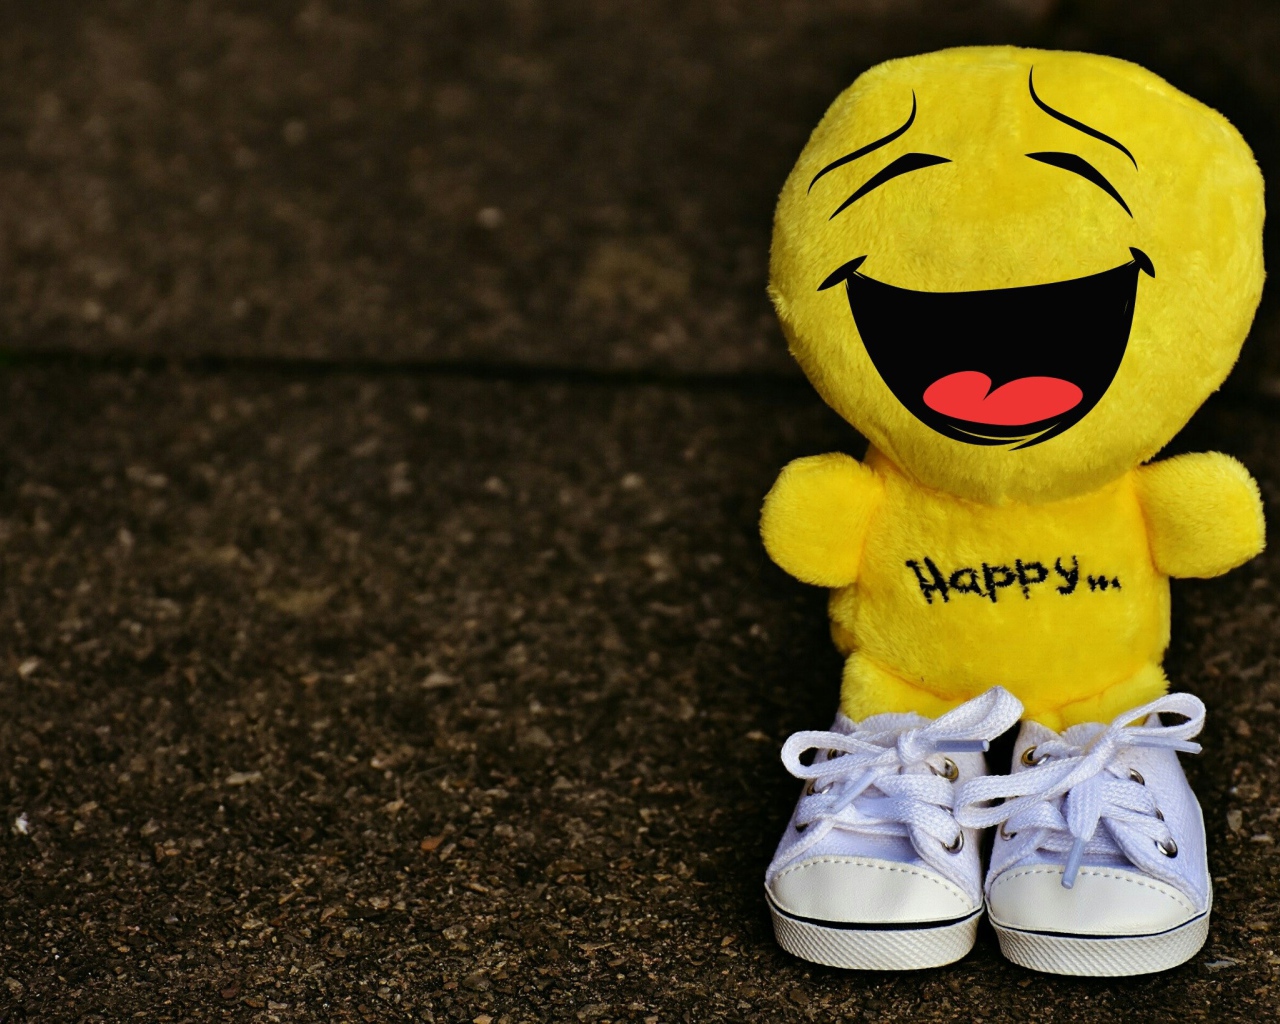 Toy smiley in sneakers